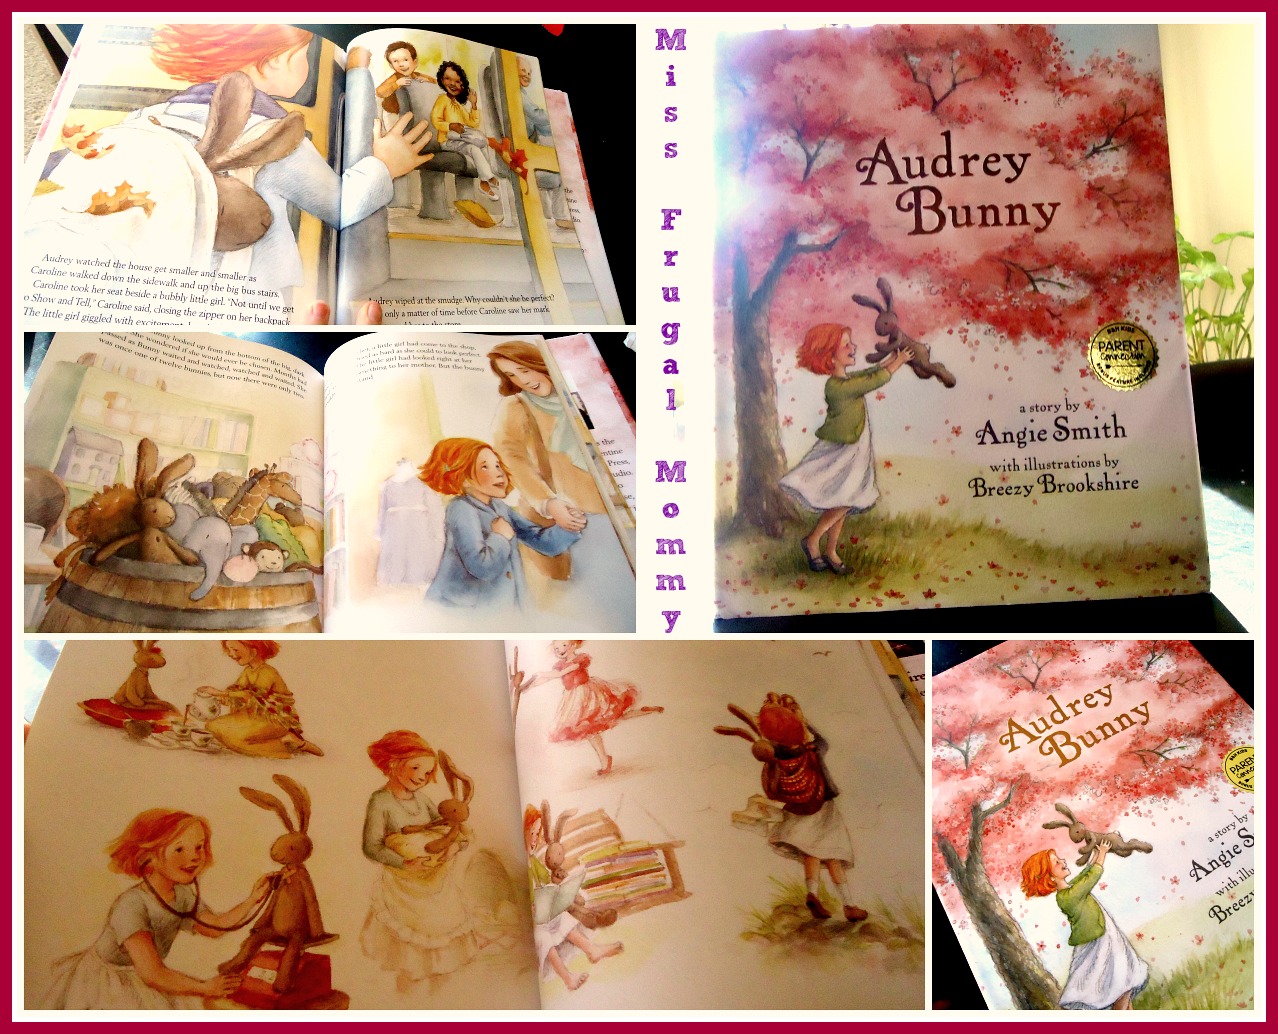 Audrey Bunny Book Review & Giveaway